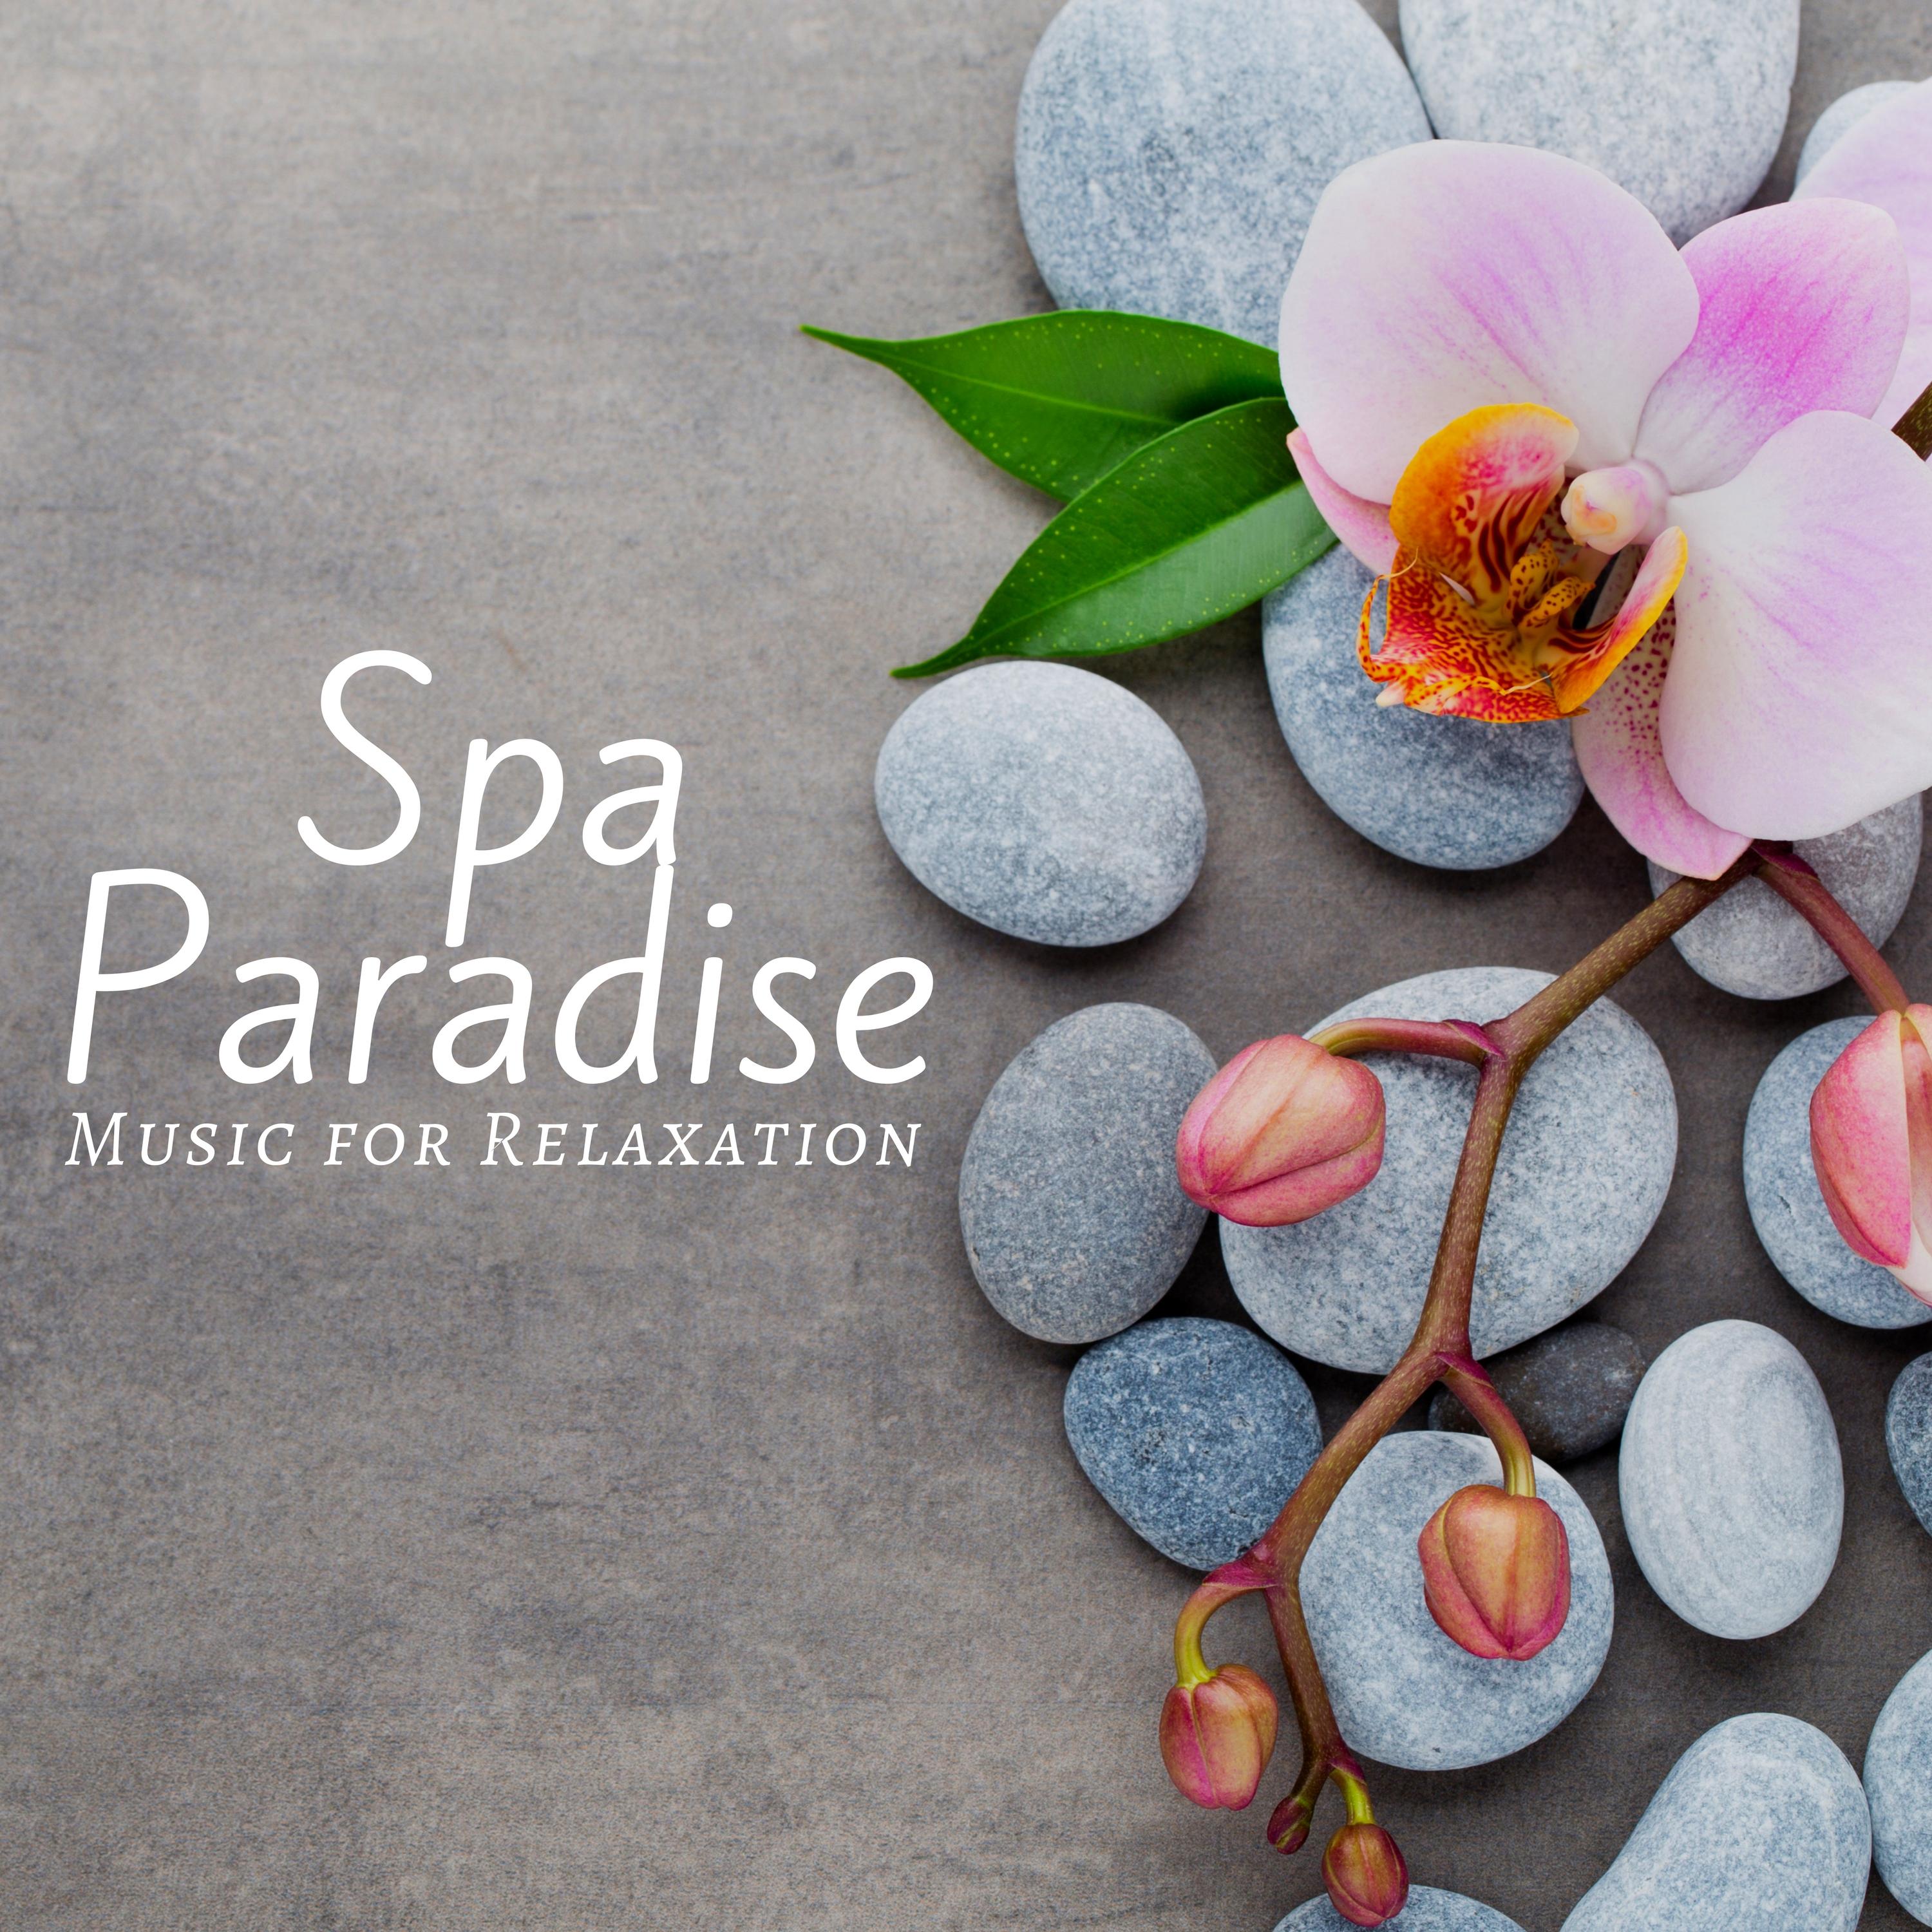 Spa Paradise: Music for Relaxation, Aromatherapy & Wellness, Massage Music, Natural Spa Sounds